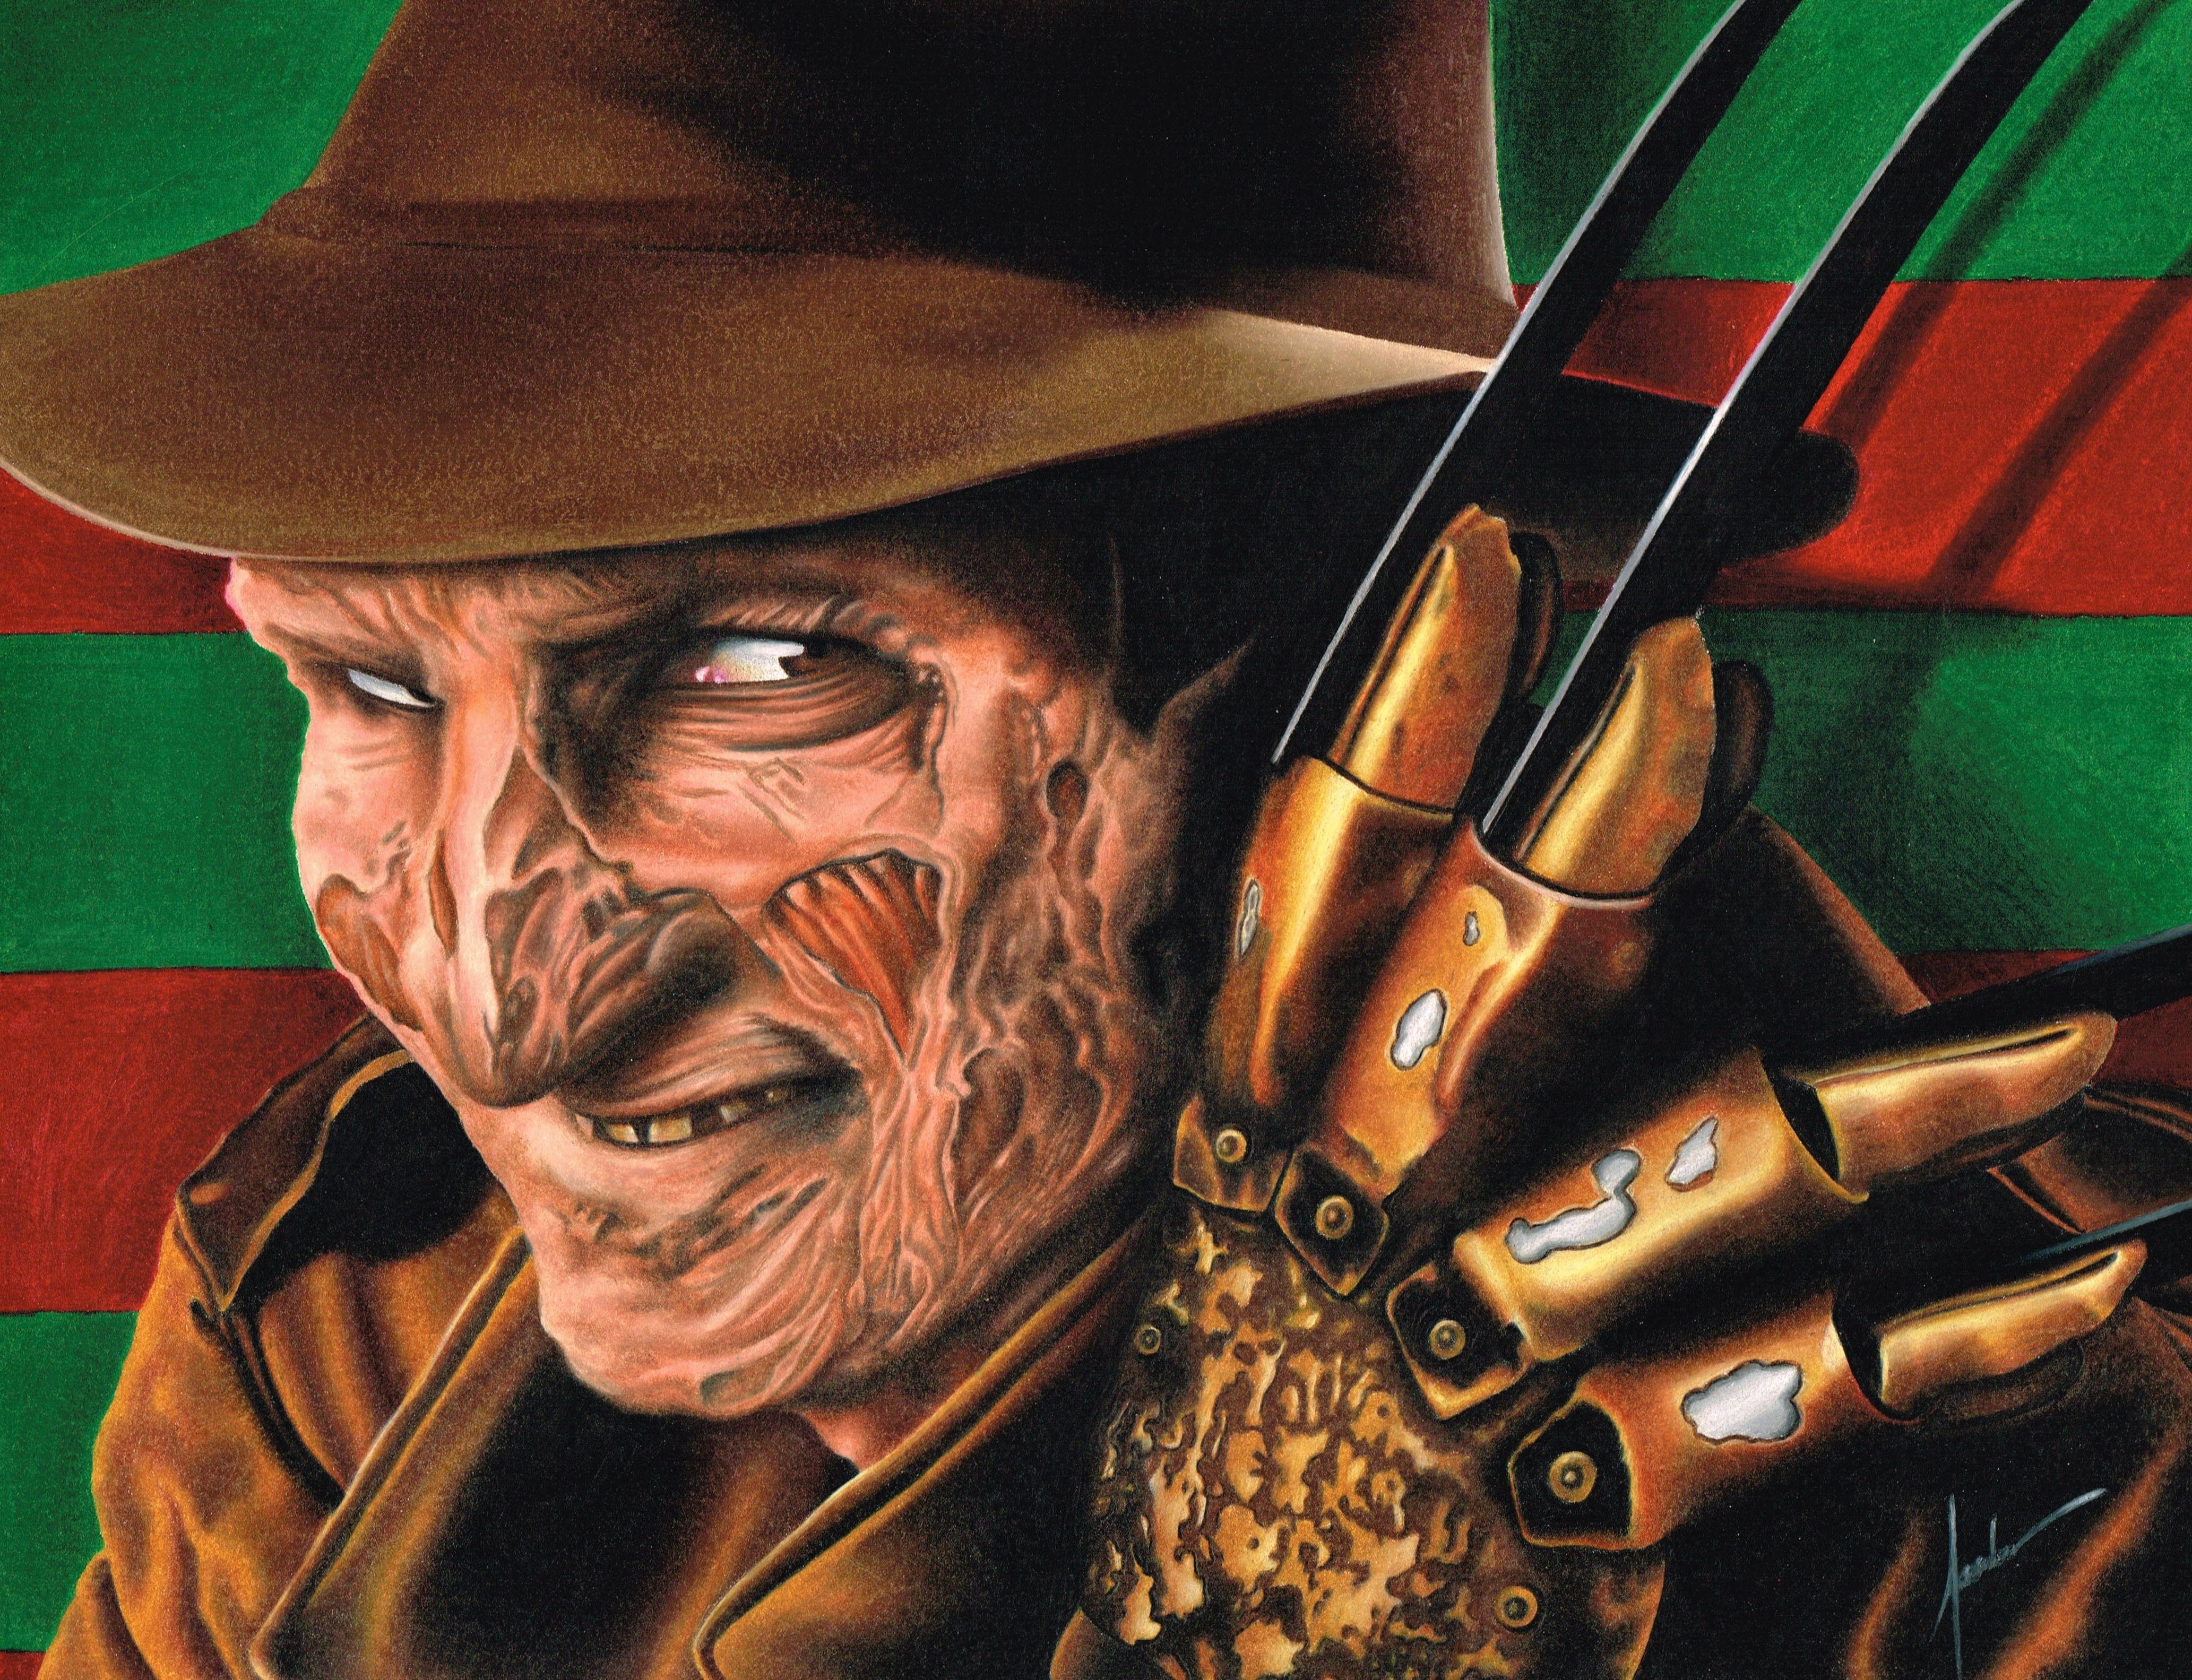 Freddy Krueger Wallpaper Image Photo Picture Background